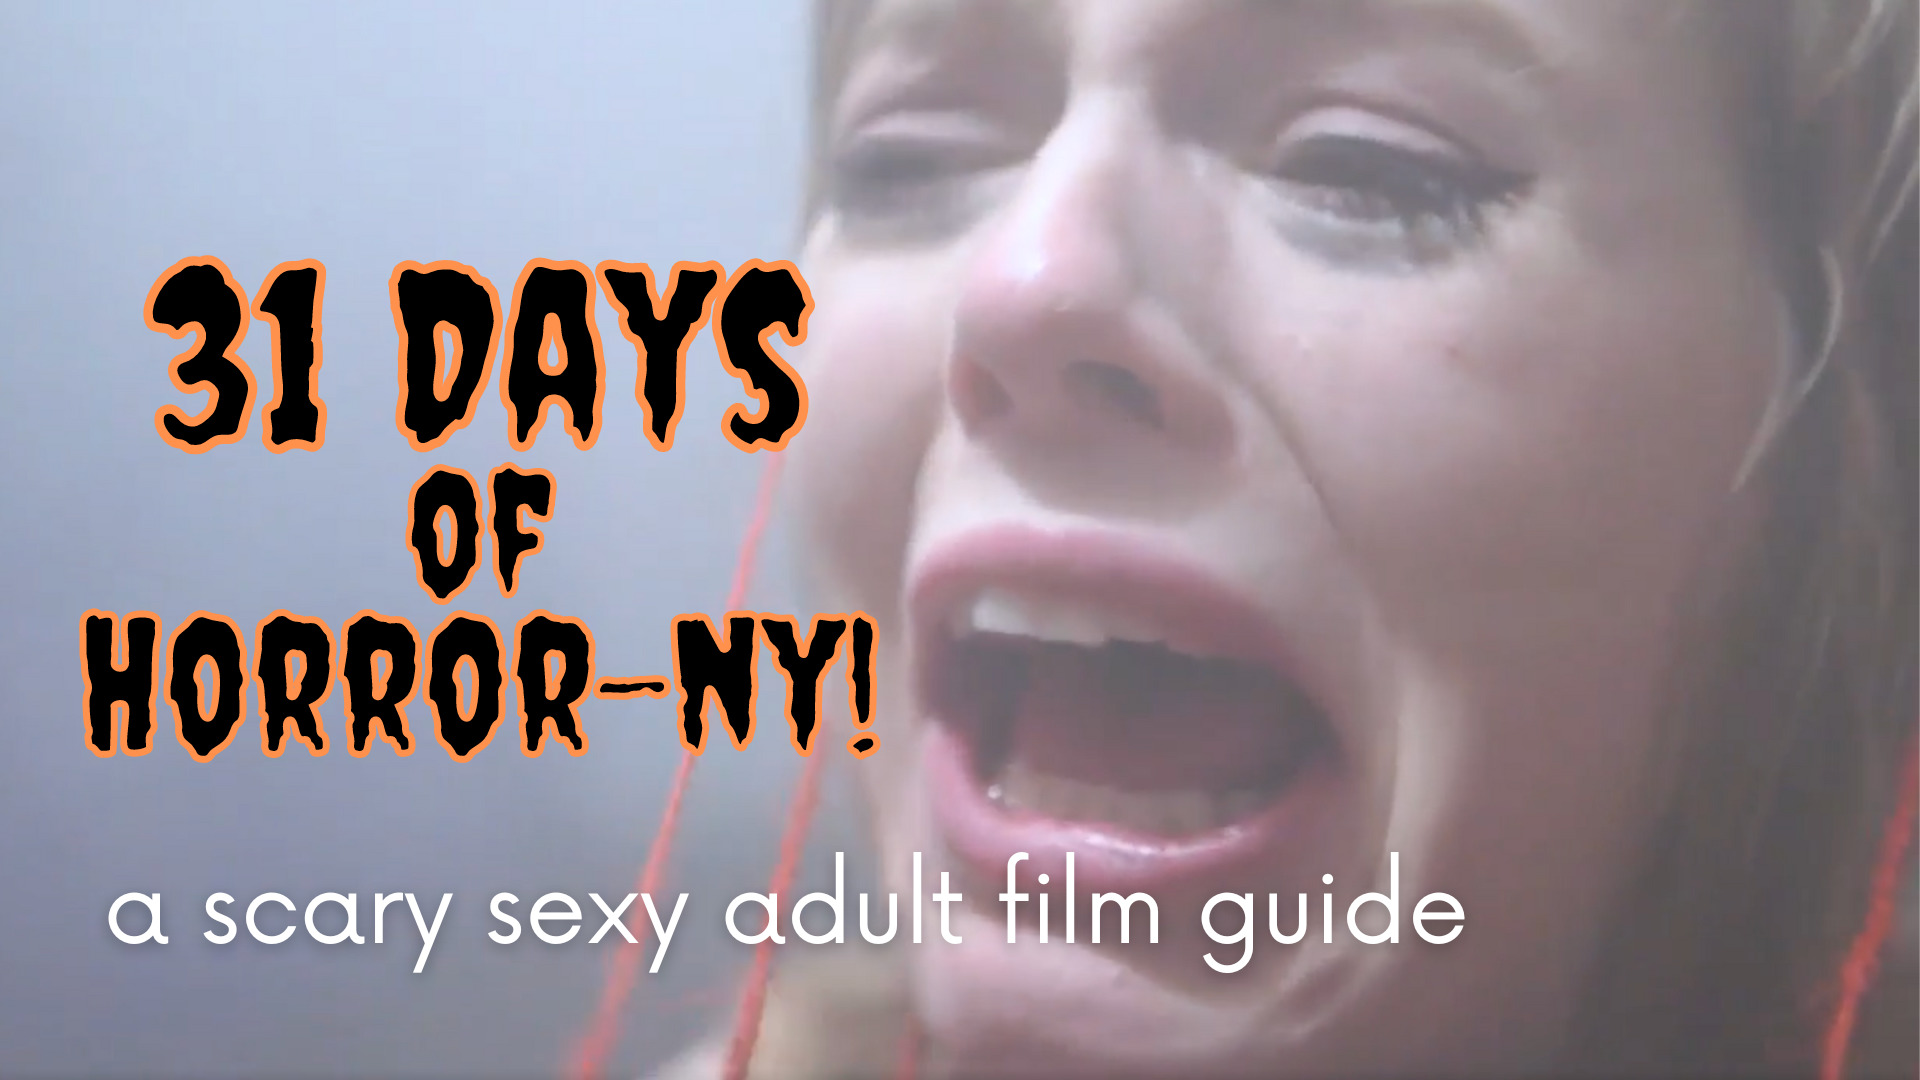 Sexy Adult Tv - 31 Days of Horror-ny! Scary Sexy Adult Films - PinkLabel.TV